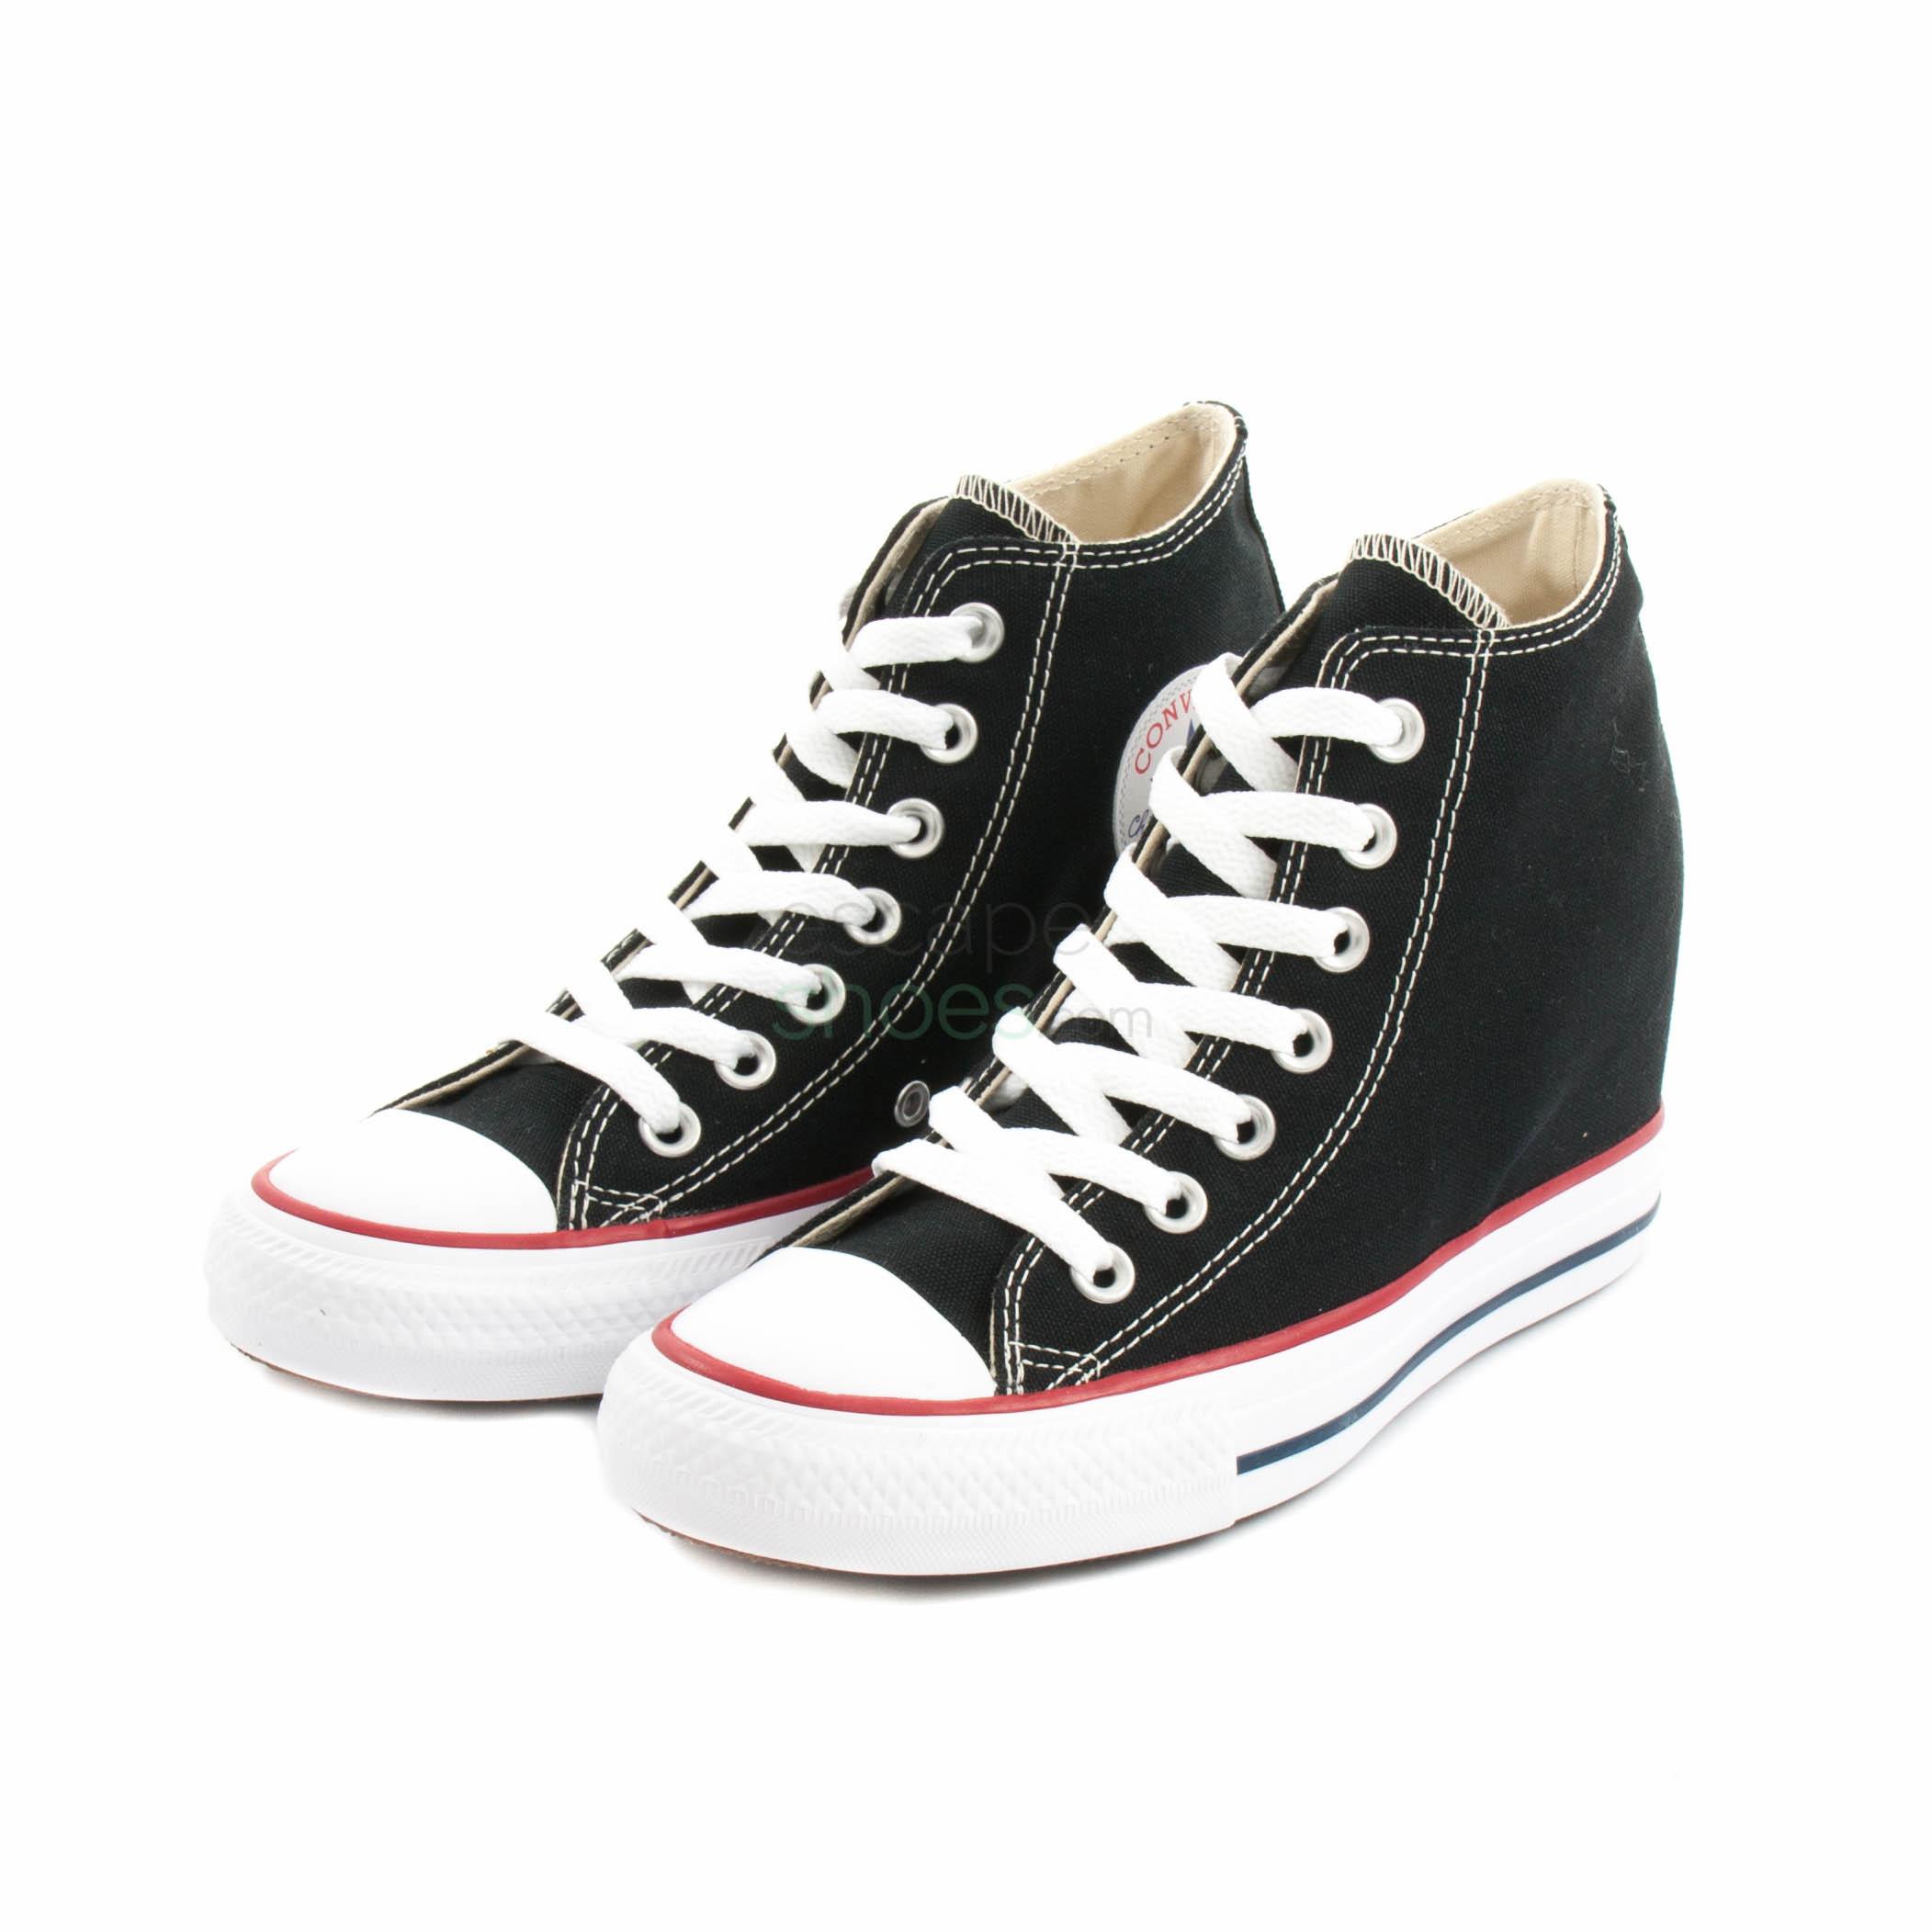 converse chuck taylor all star lux 